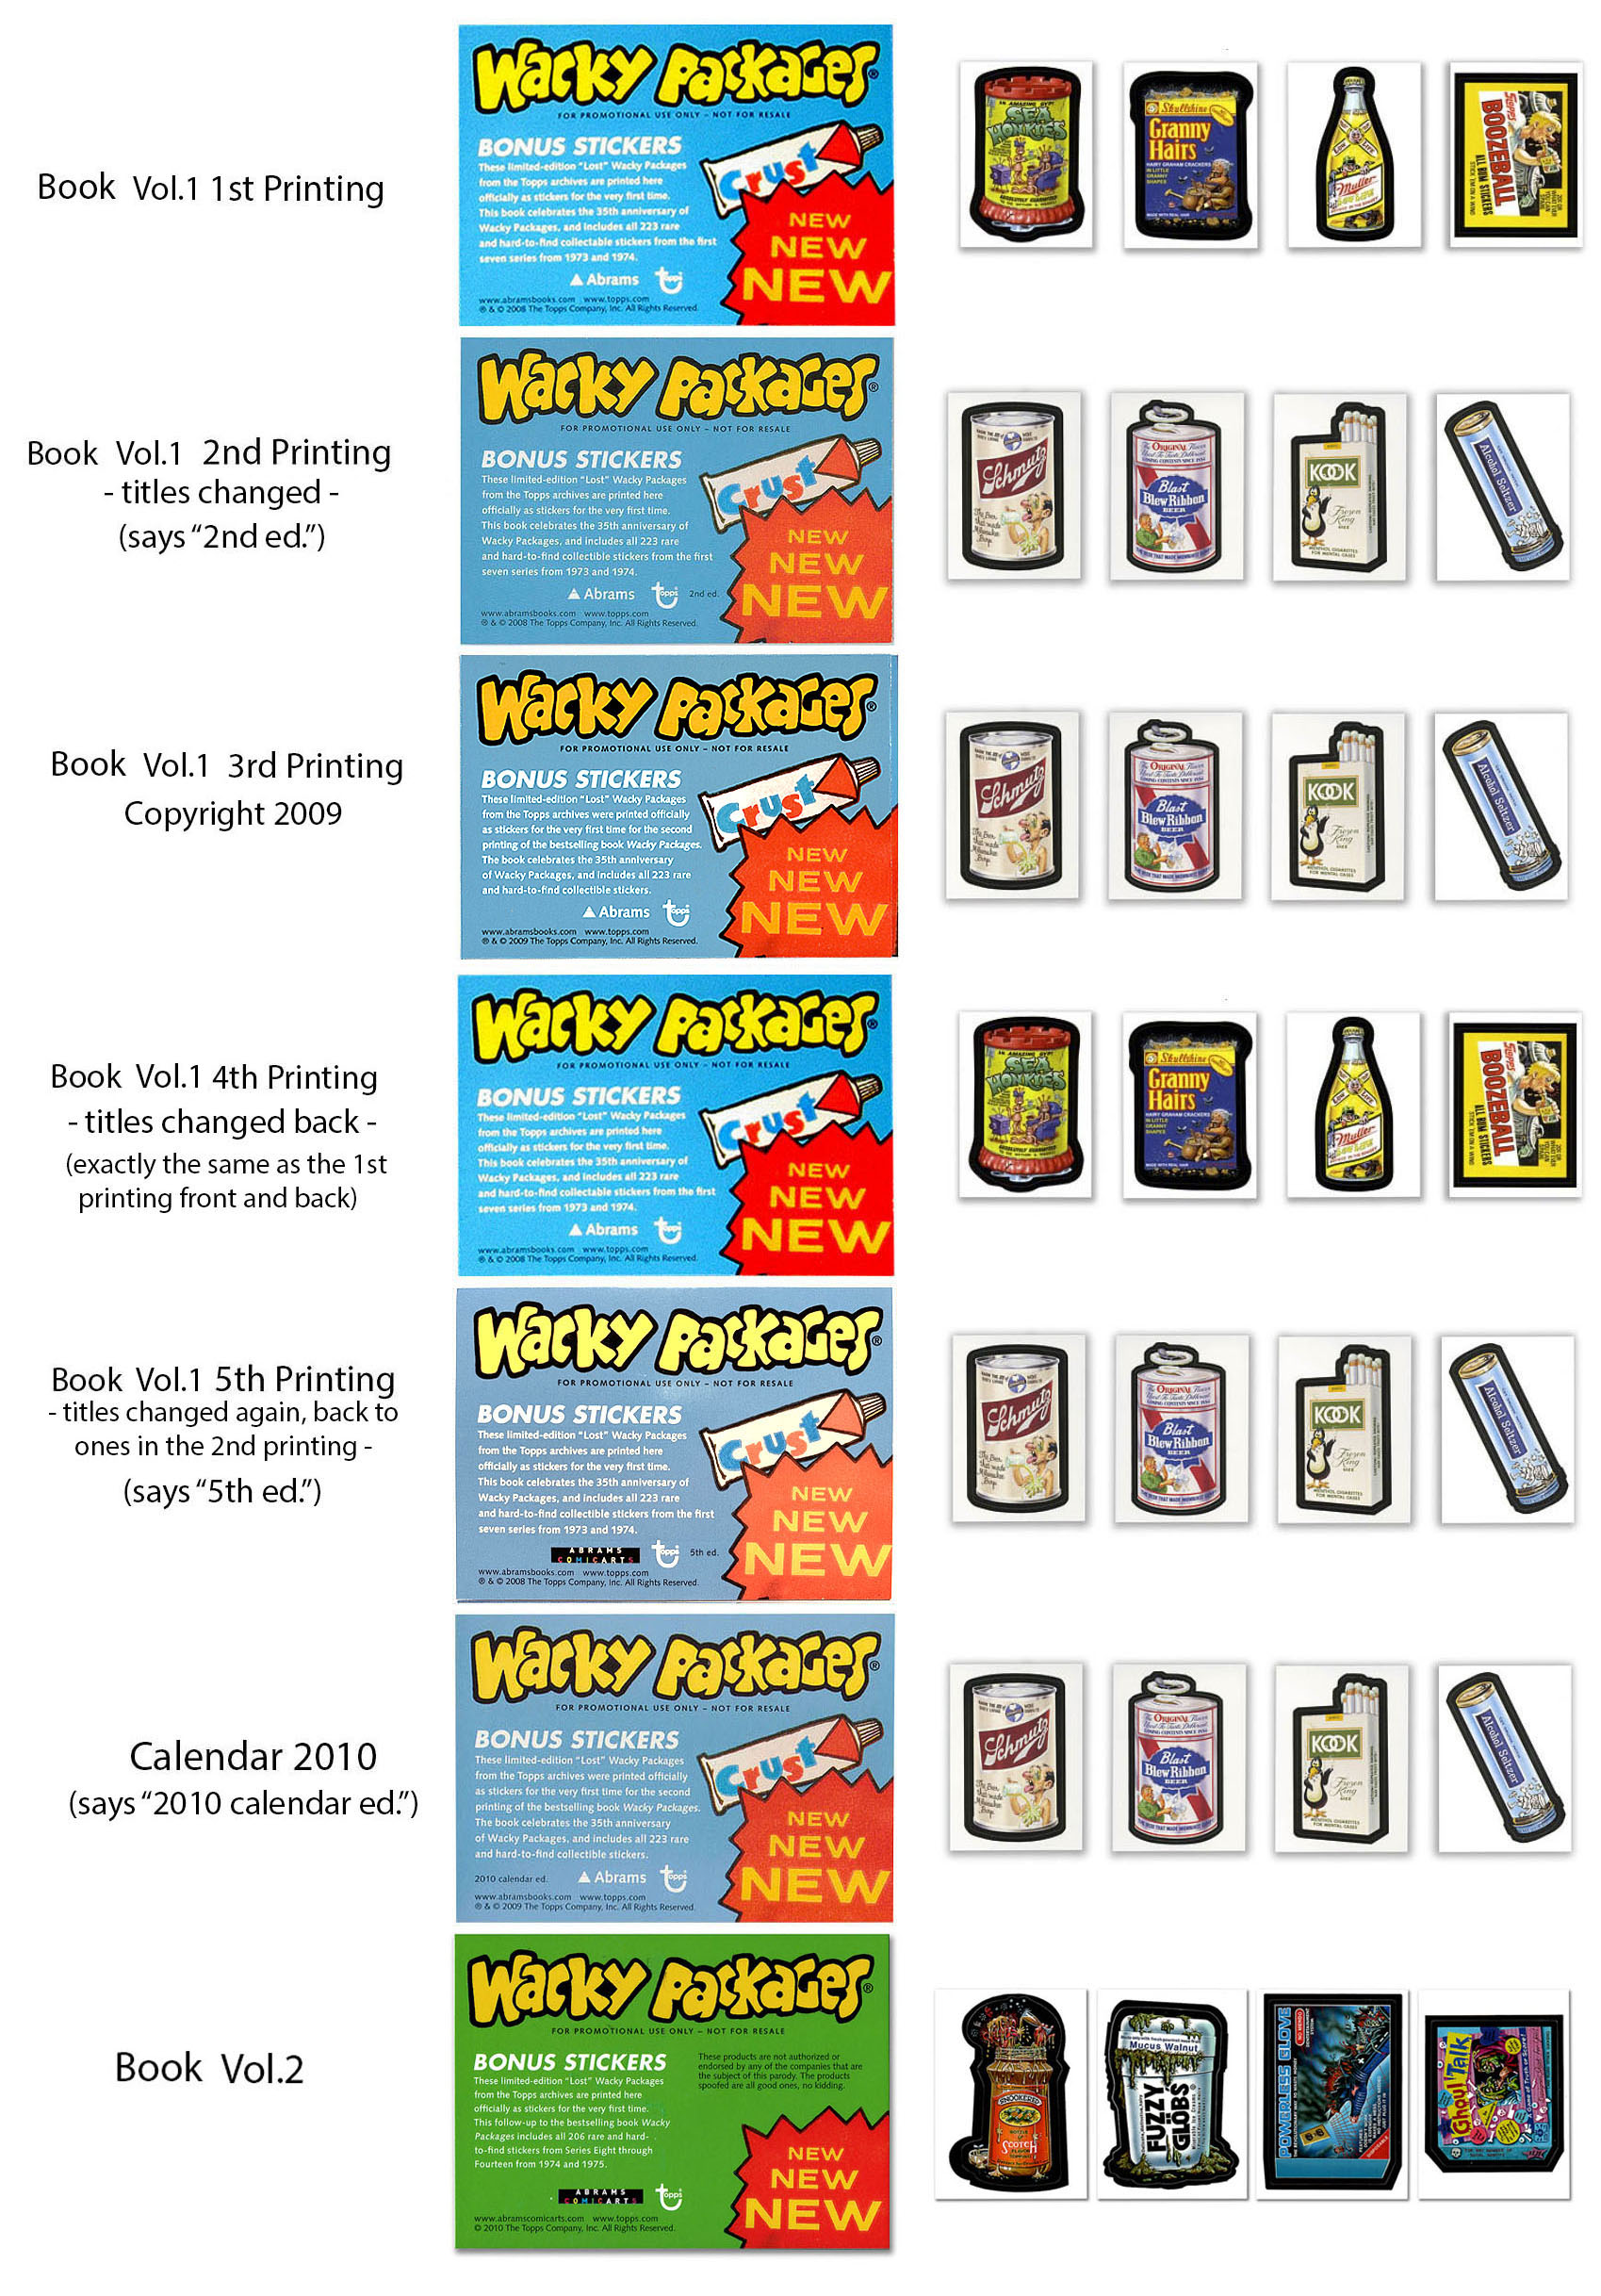 Wacky Packages Coffee Table Book 2008 2nd Edition Book & Bonus Stickers New 